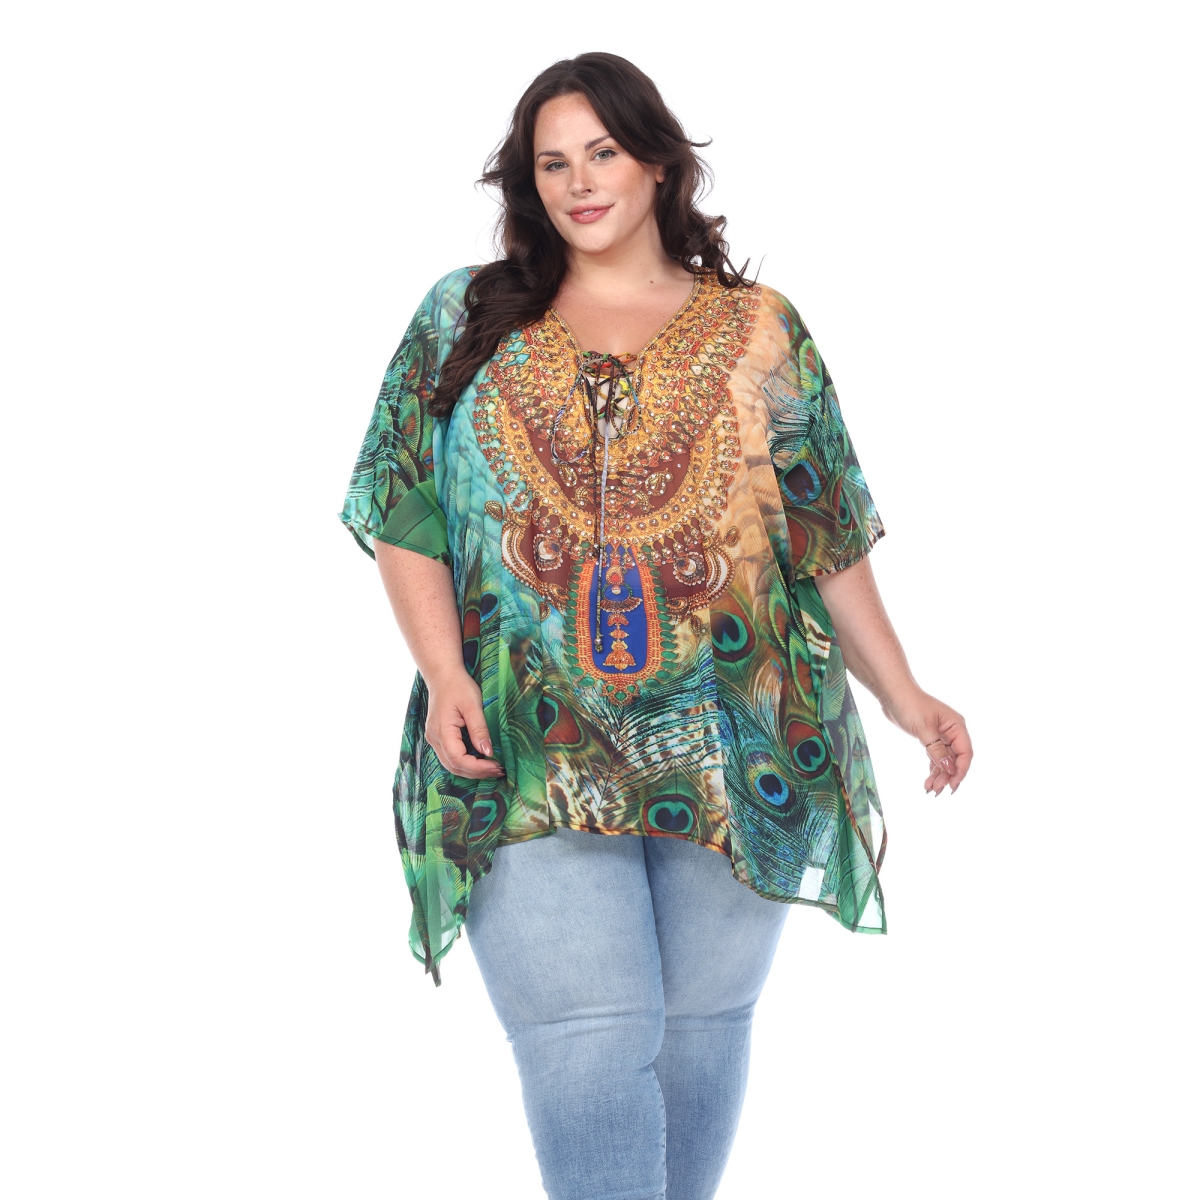 Picture of White Mark PSSK983-226 Plus Size Short Caftan with Tie-up Neckline for Women, Green Peacock